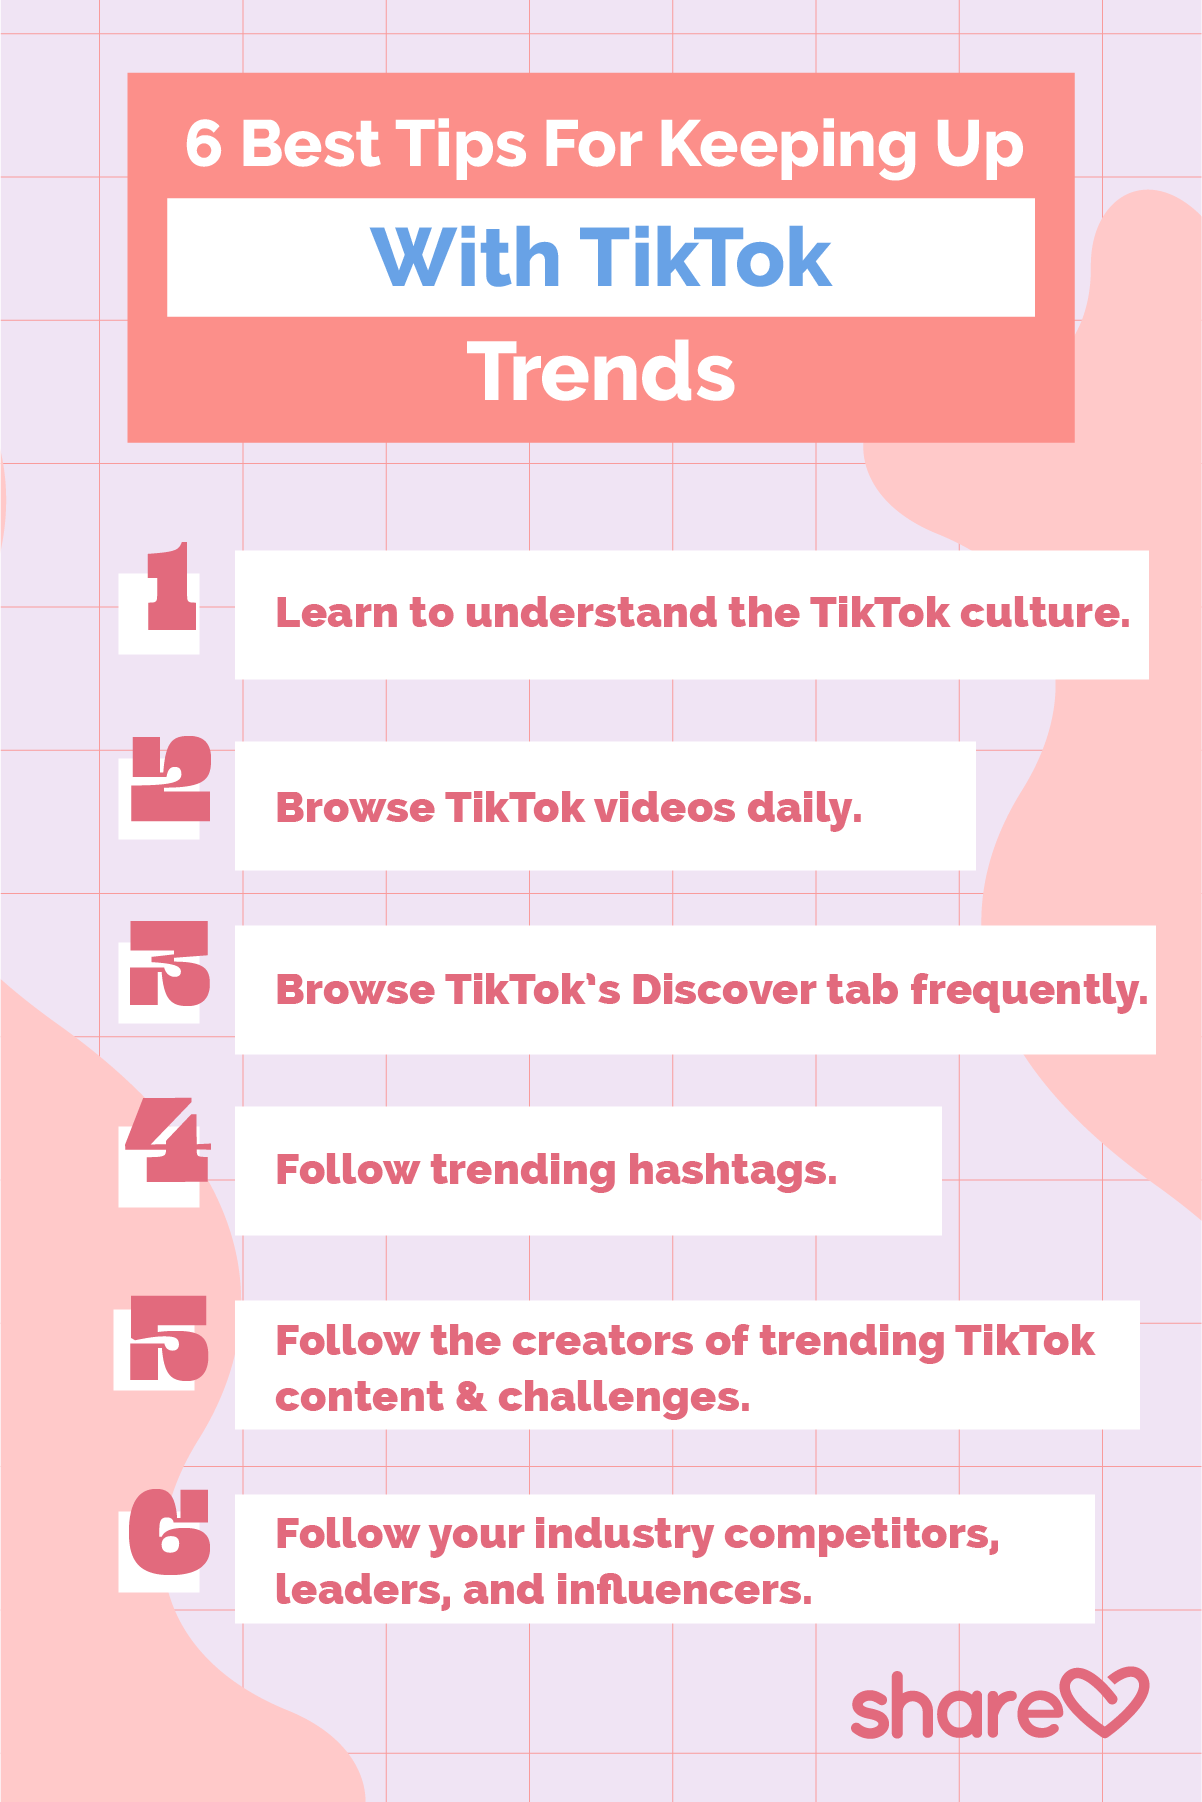 6 tips for keeping up with tiktok trends